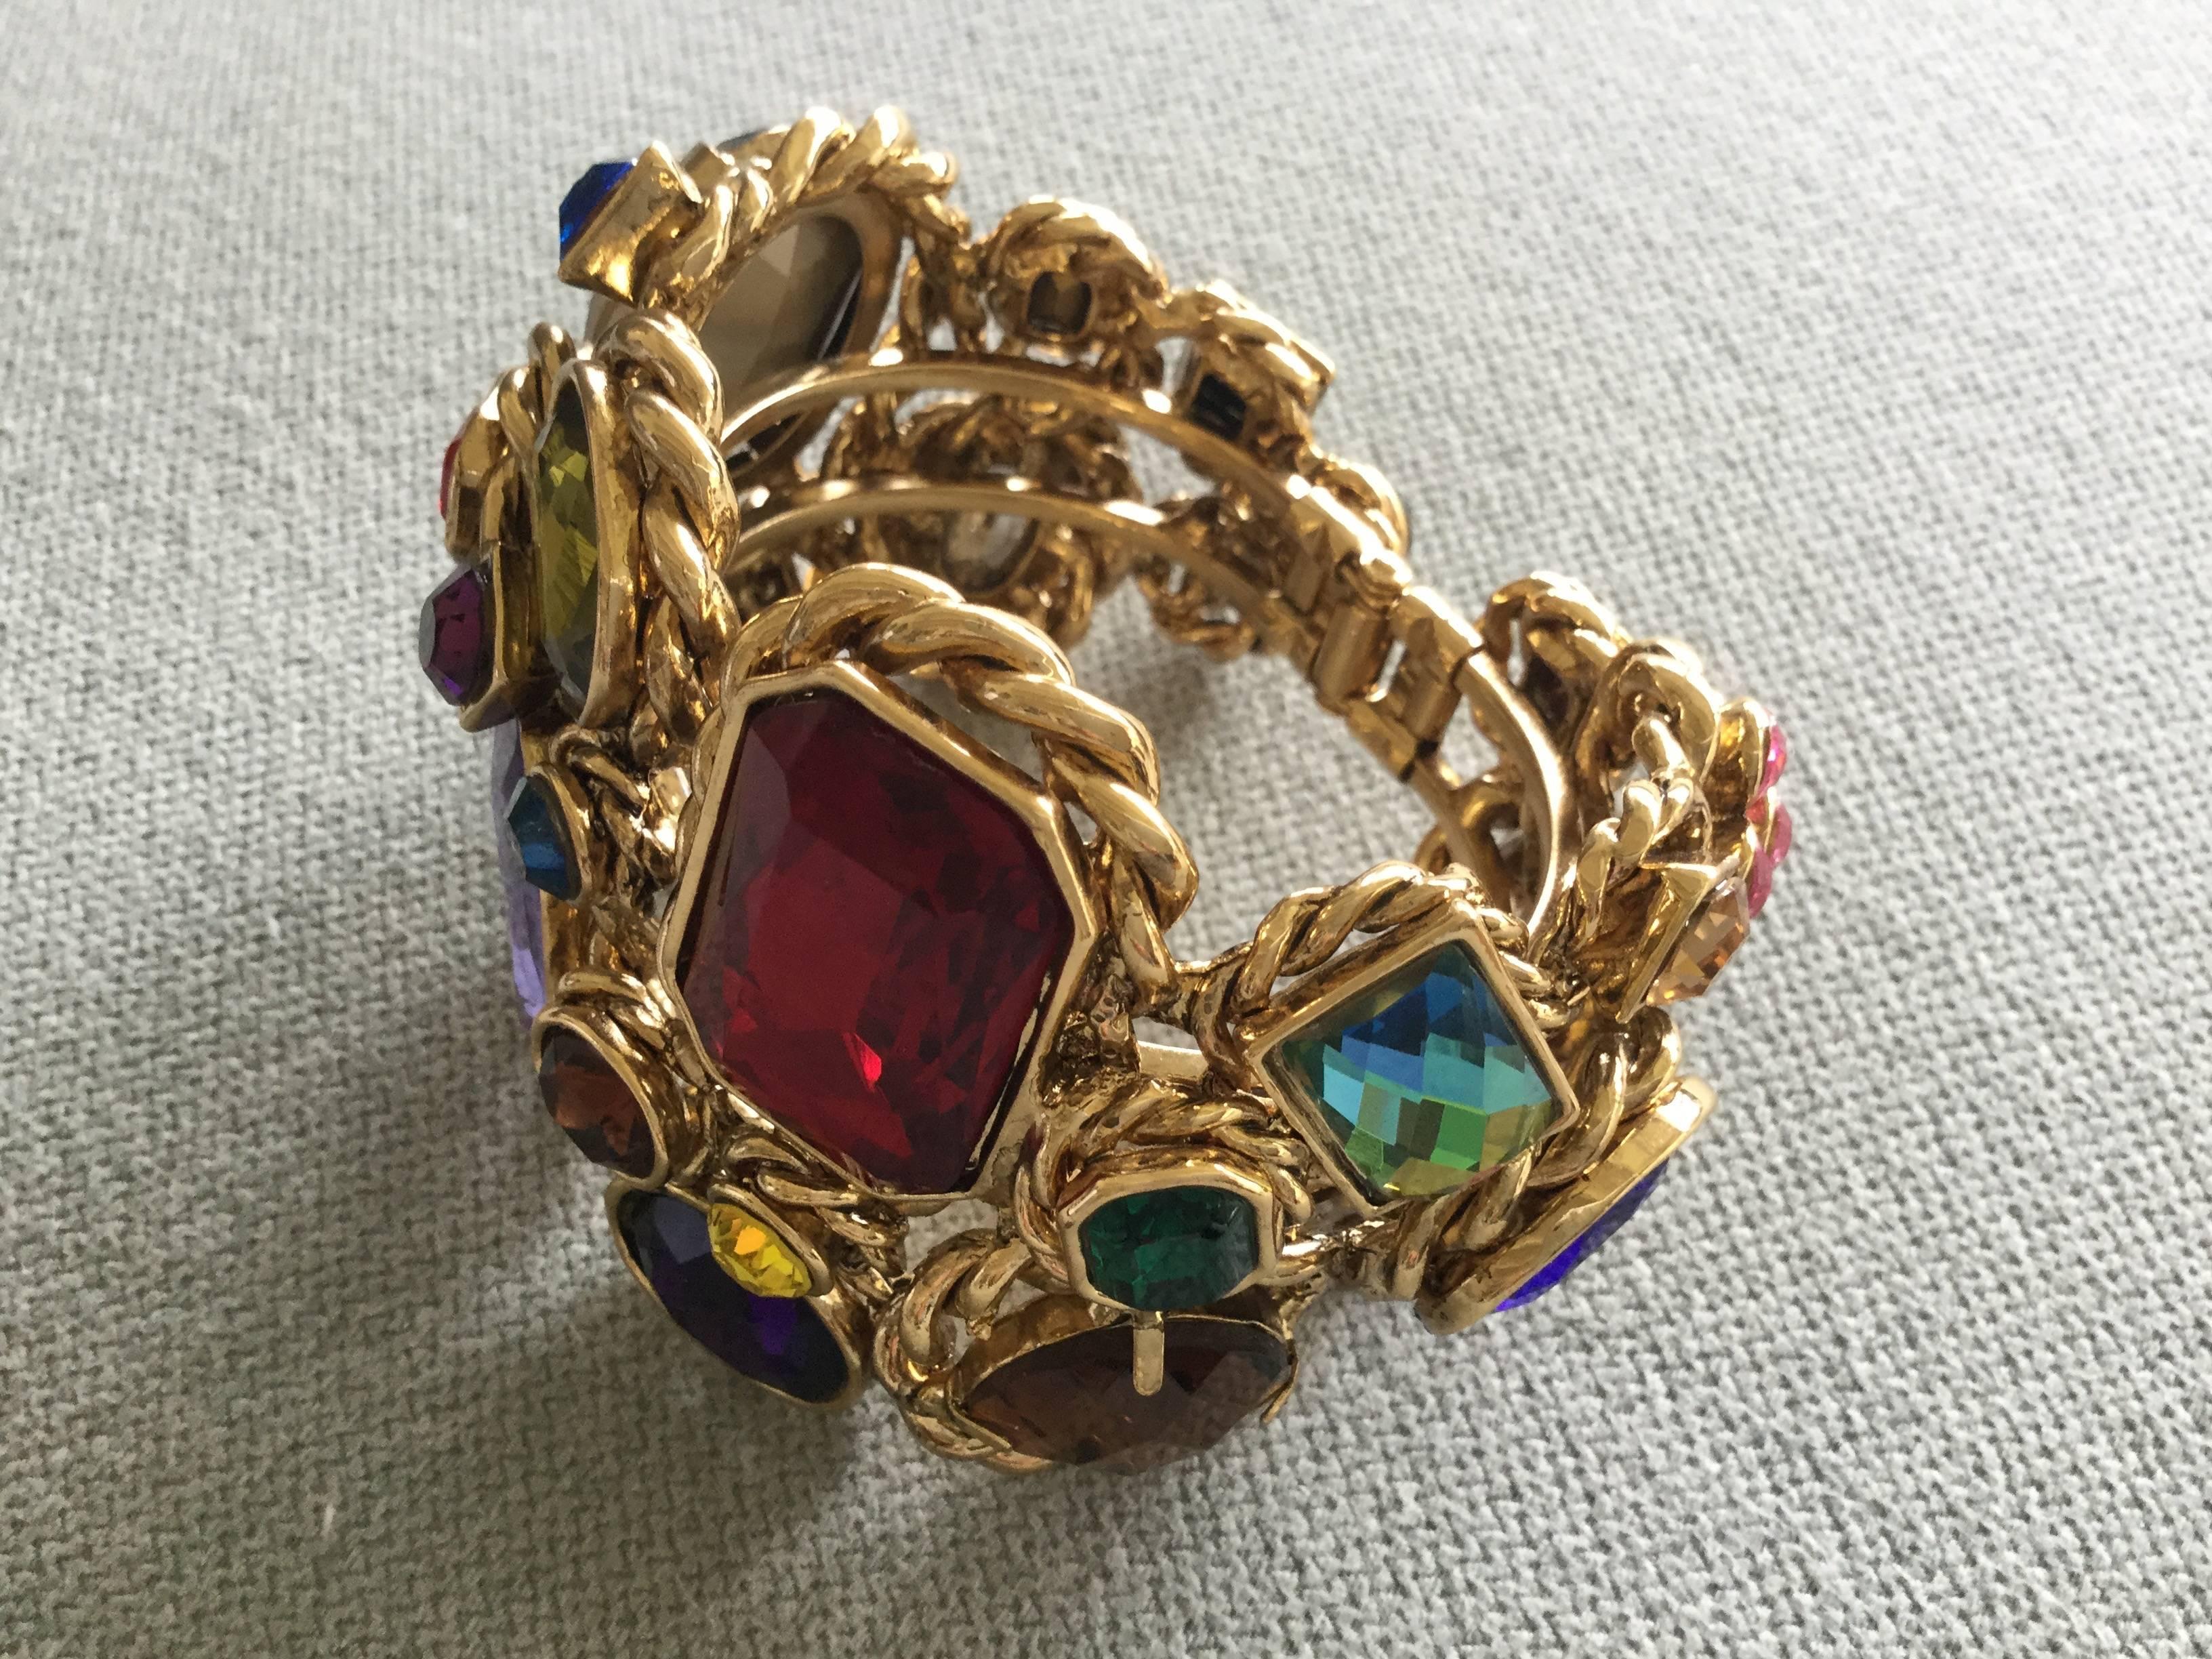 Spectacular original 1980's Butler and Wilson vintage cuff/clamper bracelet.  Monumental in scale, superb in quality. Simply not of the same universe as today's Butler and Wilson pieces.  Variously sized faceted crystal pastes in richly colored